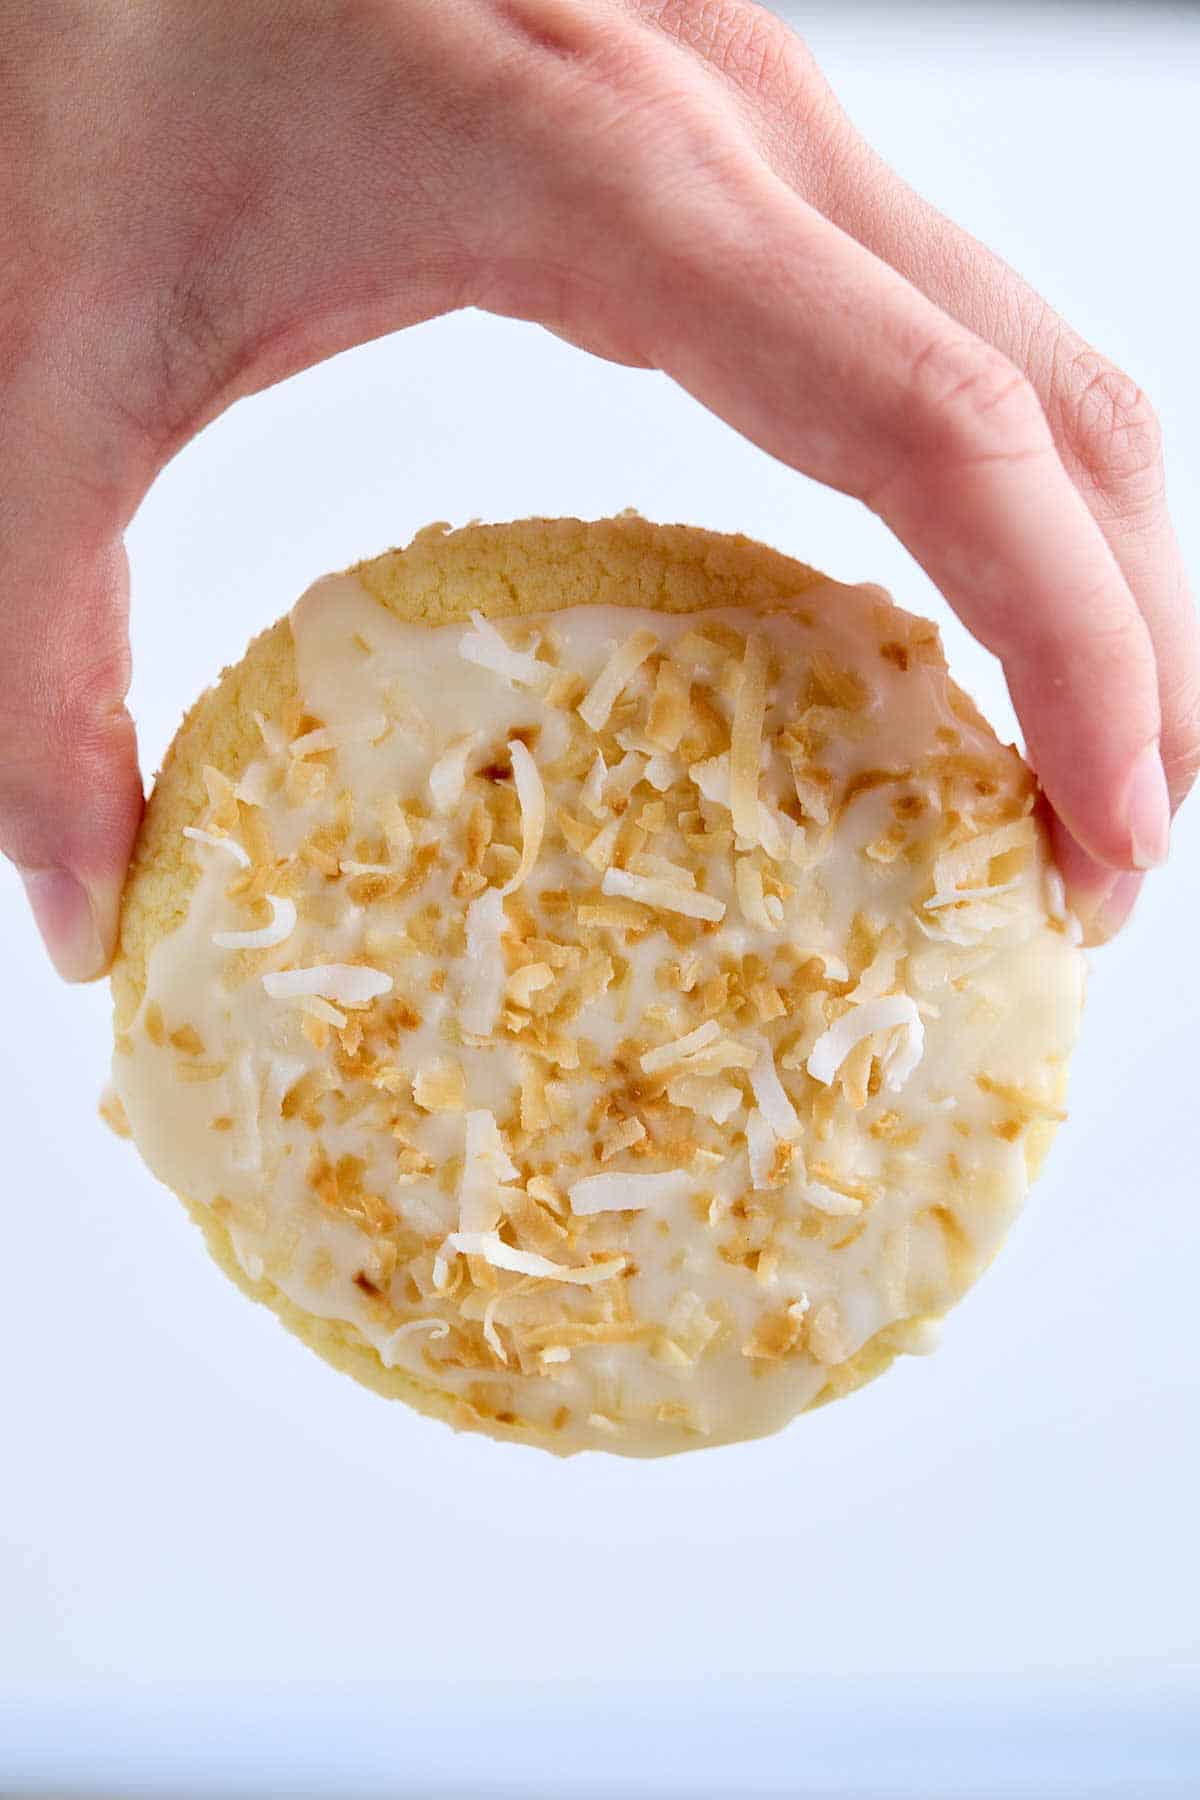 Fingers holding a pineapple cake mix cookie showing the size and the glaze with coconut.